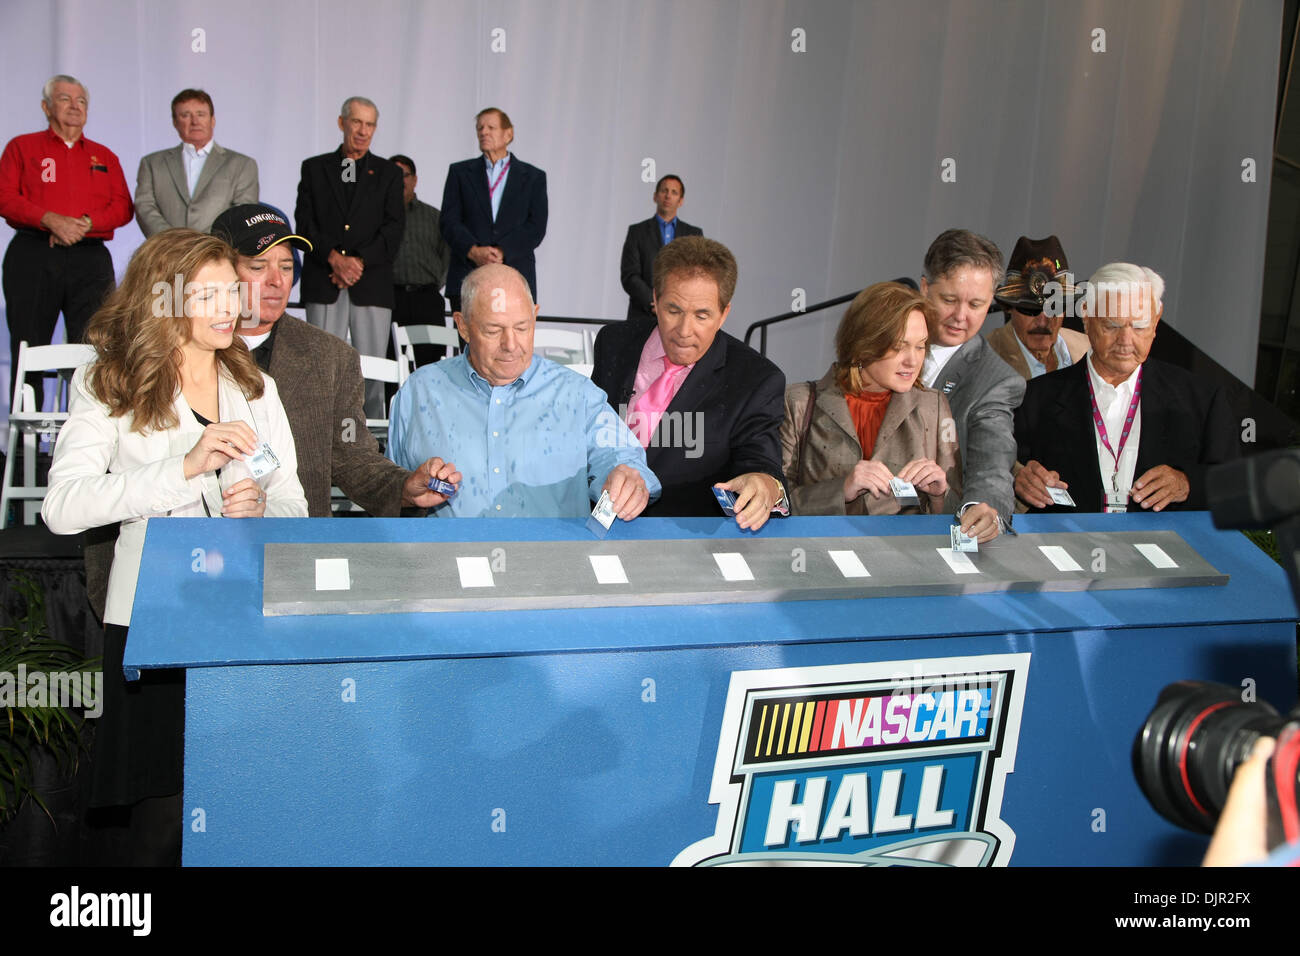 May 11, 2010 - Charlotte, North Carolina, U.S. - Grand Opening of the Nascar Hall of Fame festivities saw from left, TERESA EARNHARDT, RON HORNADAY JR., JACK INGRAM, DARELL WALTRIP, LISA FRANCE KENNEDY, BRIAN FRANCE (behind Lisa France Kennedy), RICHARD PETTY and JUNIOR JOHNSON officially open the Hall. The Nascar Hall of Fame is located in Charlotte, North Carolina.  (Credit Image Stock Photo